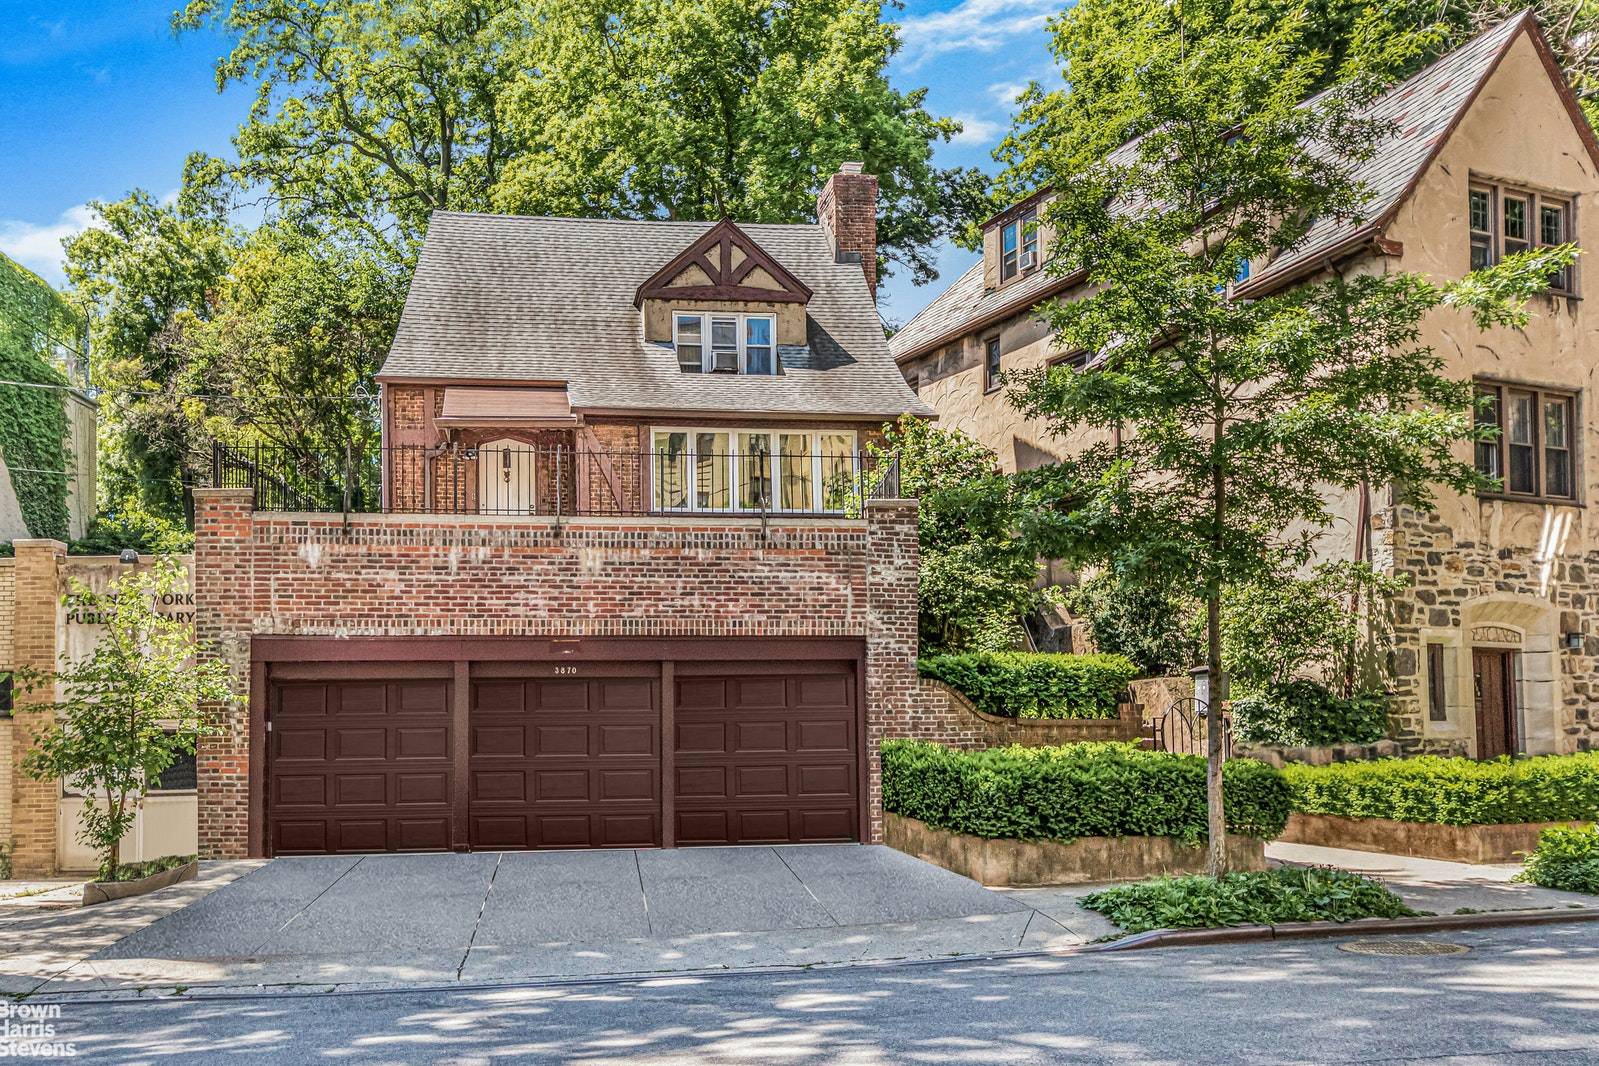 Timeless versatility, classic elegance and solid dependability are just some of the many outstanding features of this pre war brick multi unit Kingsbridge Heights home.